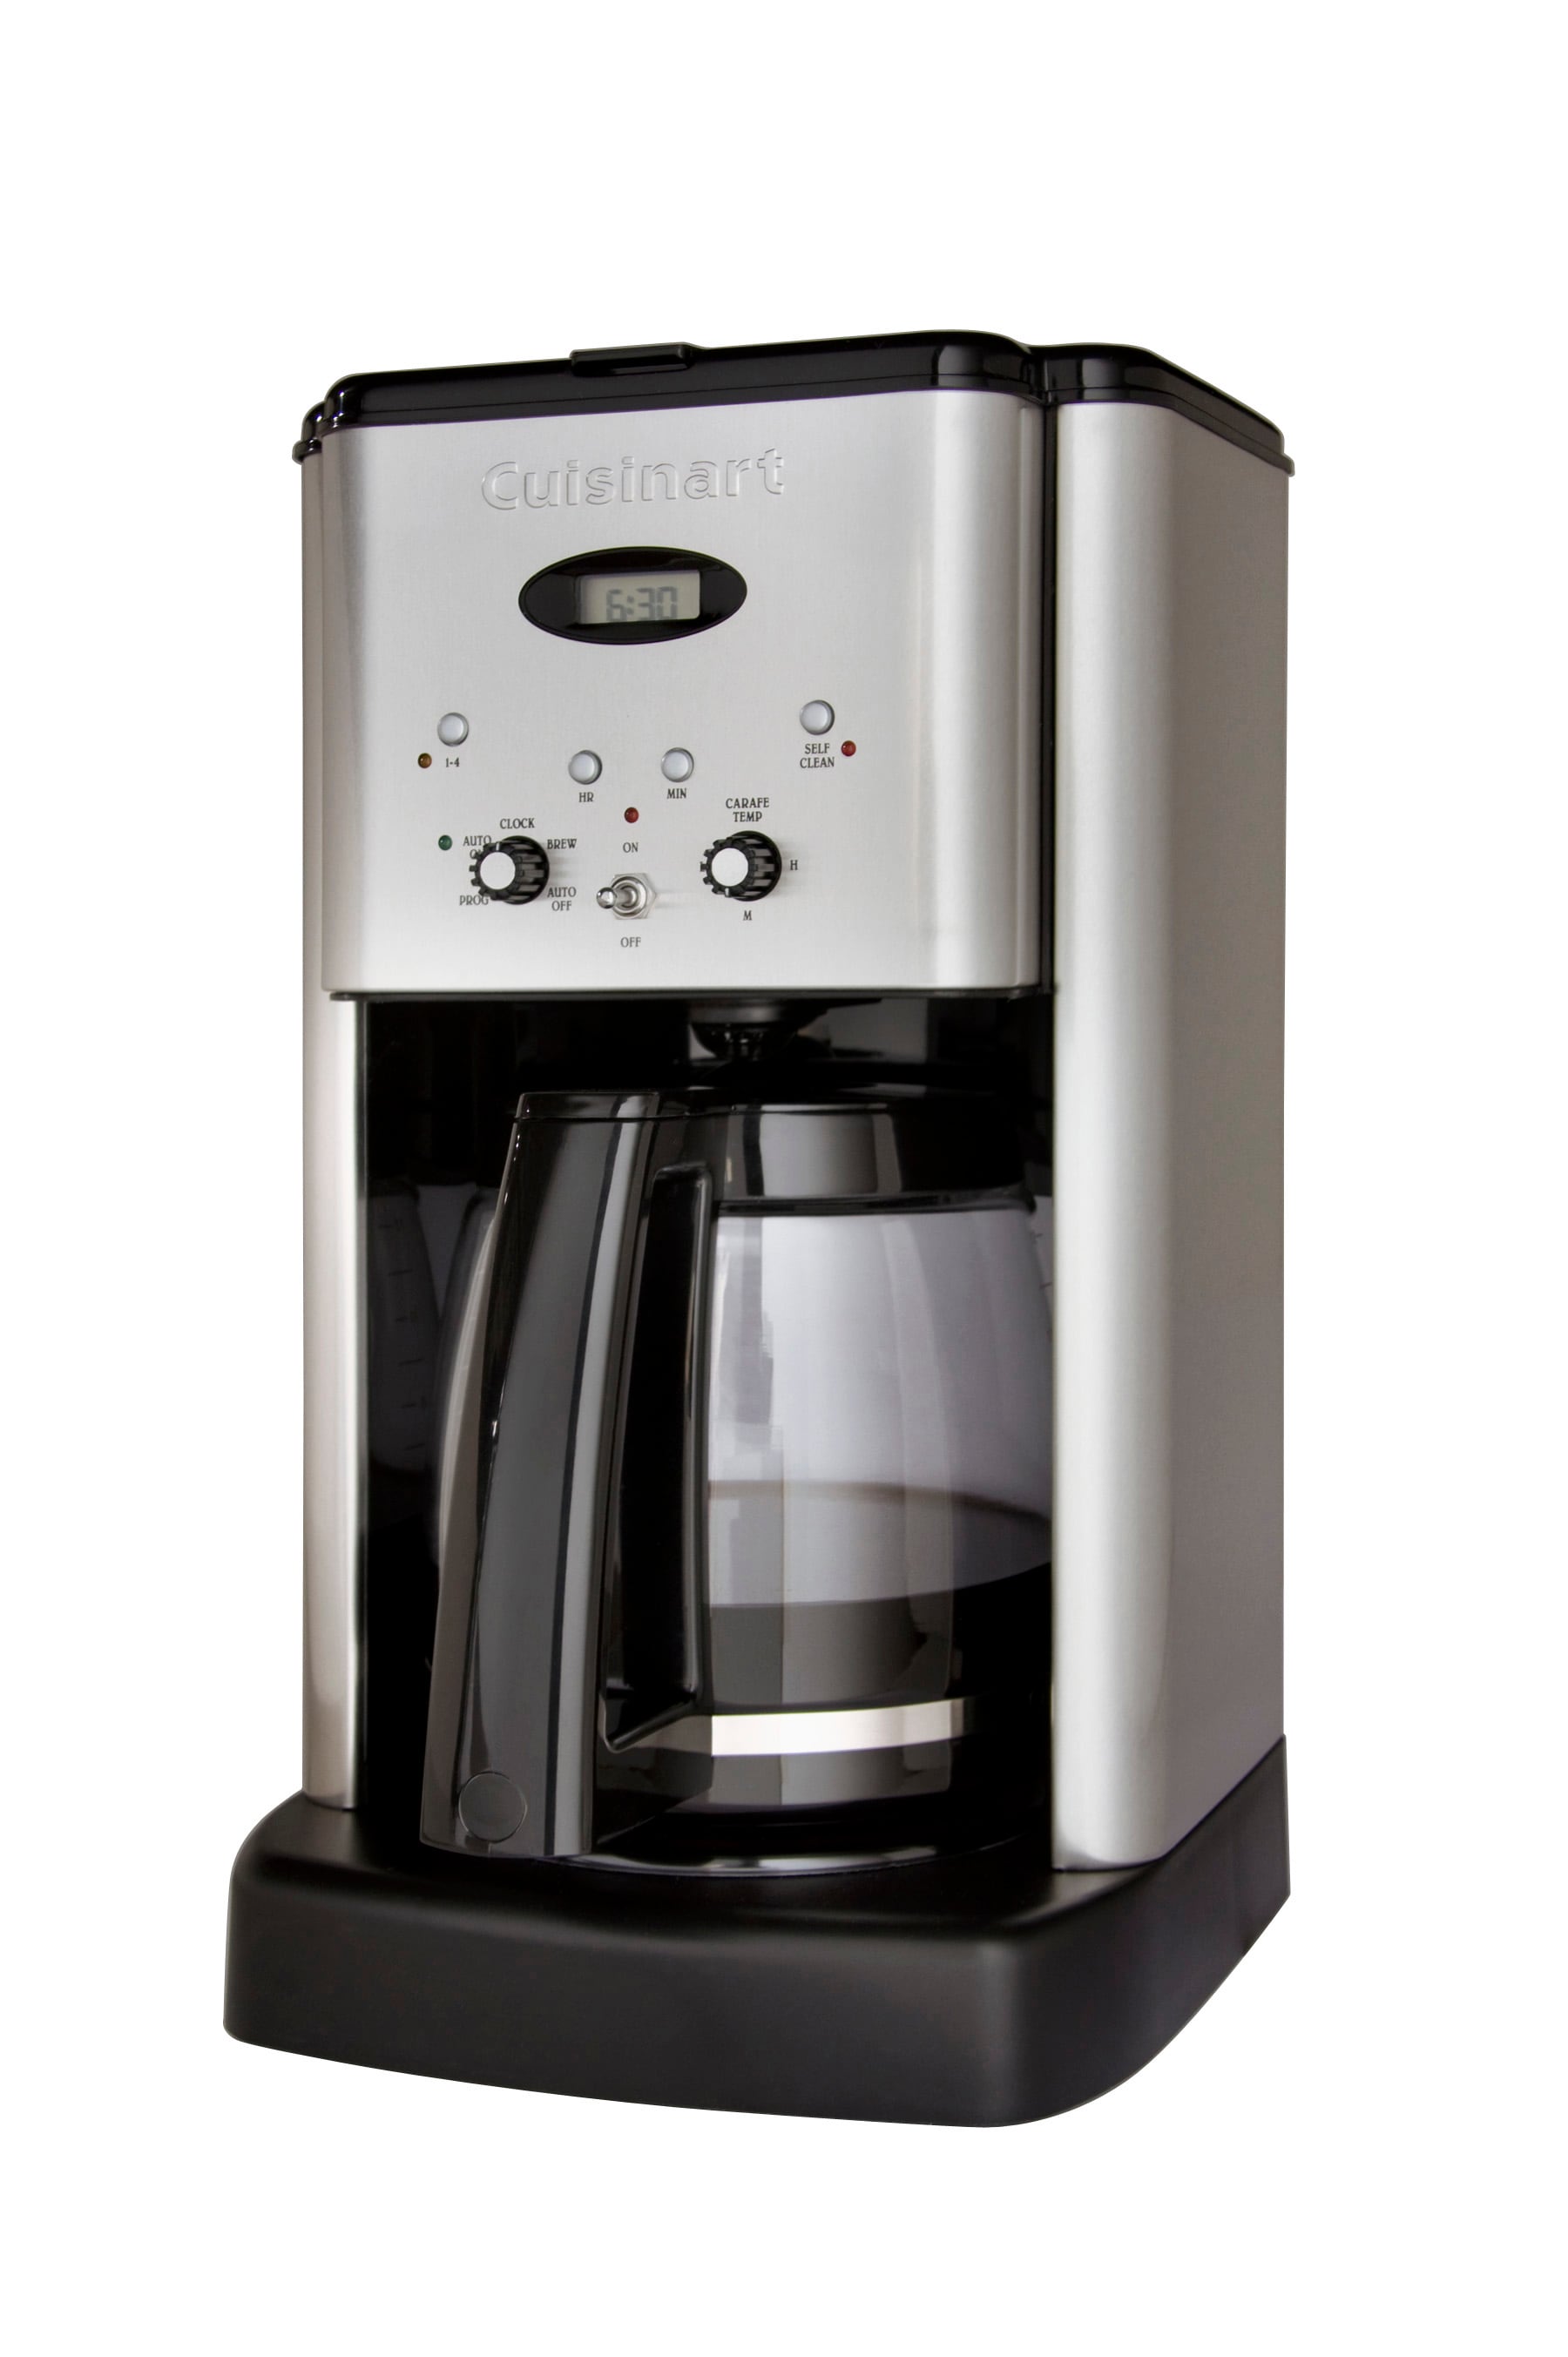 Cuisinart 12 Cup Stainless Steel Coffee Maker, DCC-1220WM